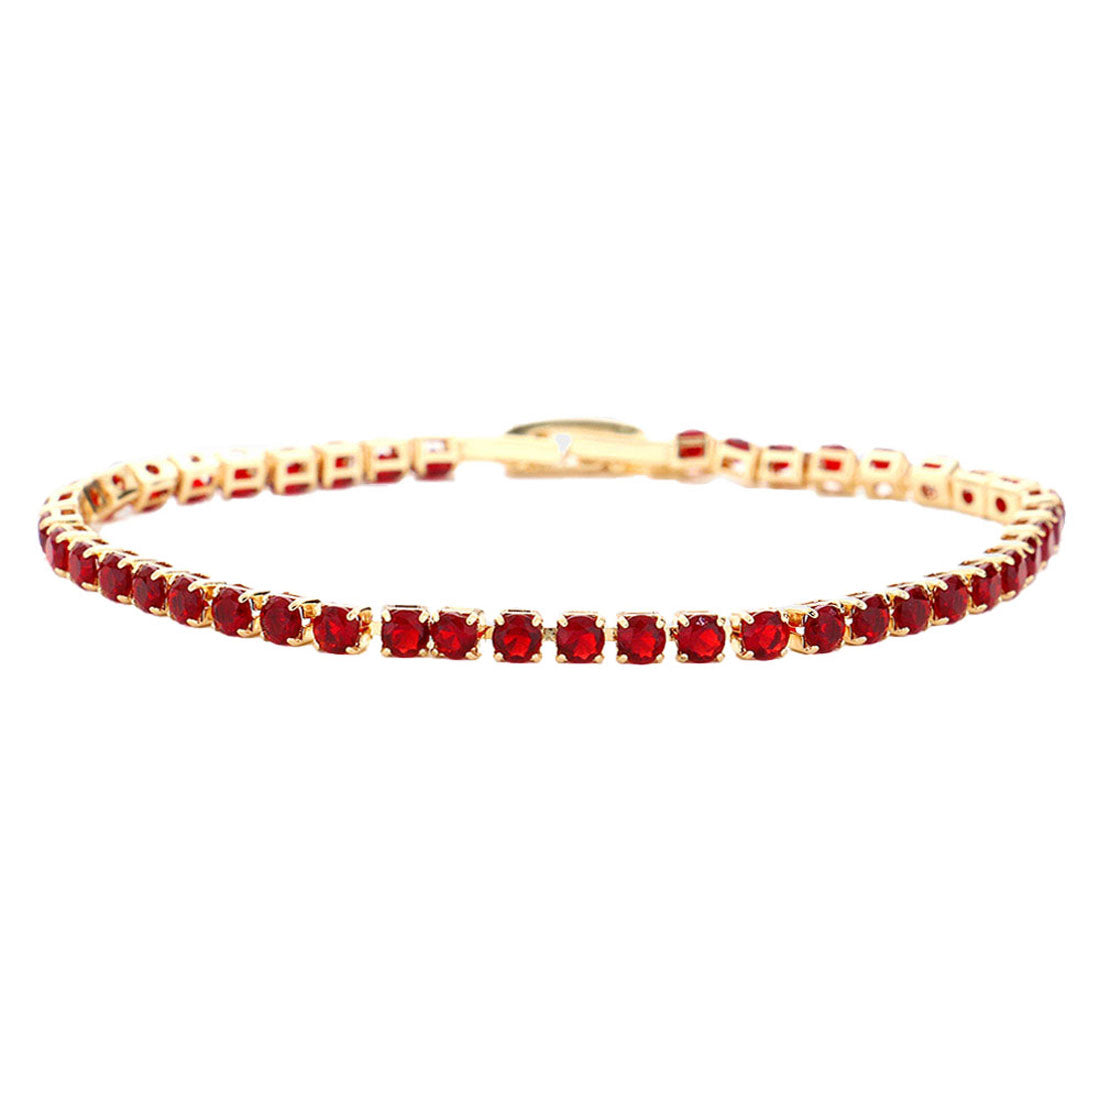 Siam Brass Metal Tennis Evening Bracelet, Get ready with these Evening Bracelet, put on a pop of color to complete your ensemble. Perfect for adding just the right amount of shimmer & shine and a touch of class to special events. Perfect Birthday Gift, Anniversary Gift, Mother's Day Gift, Graduation Gift.